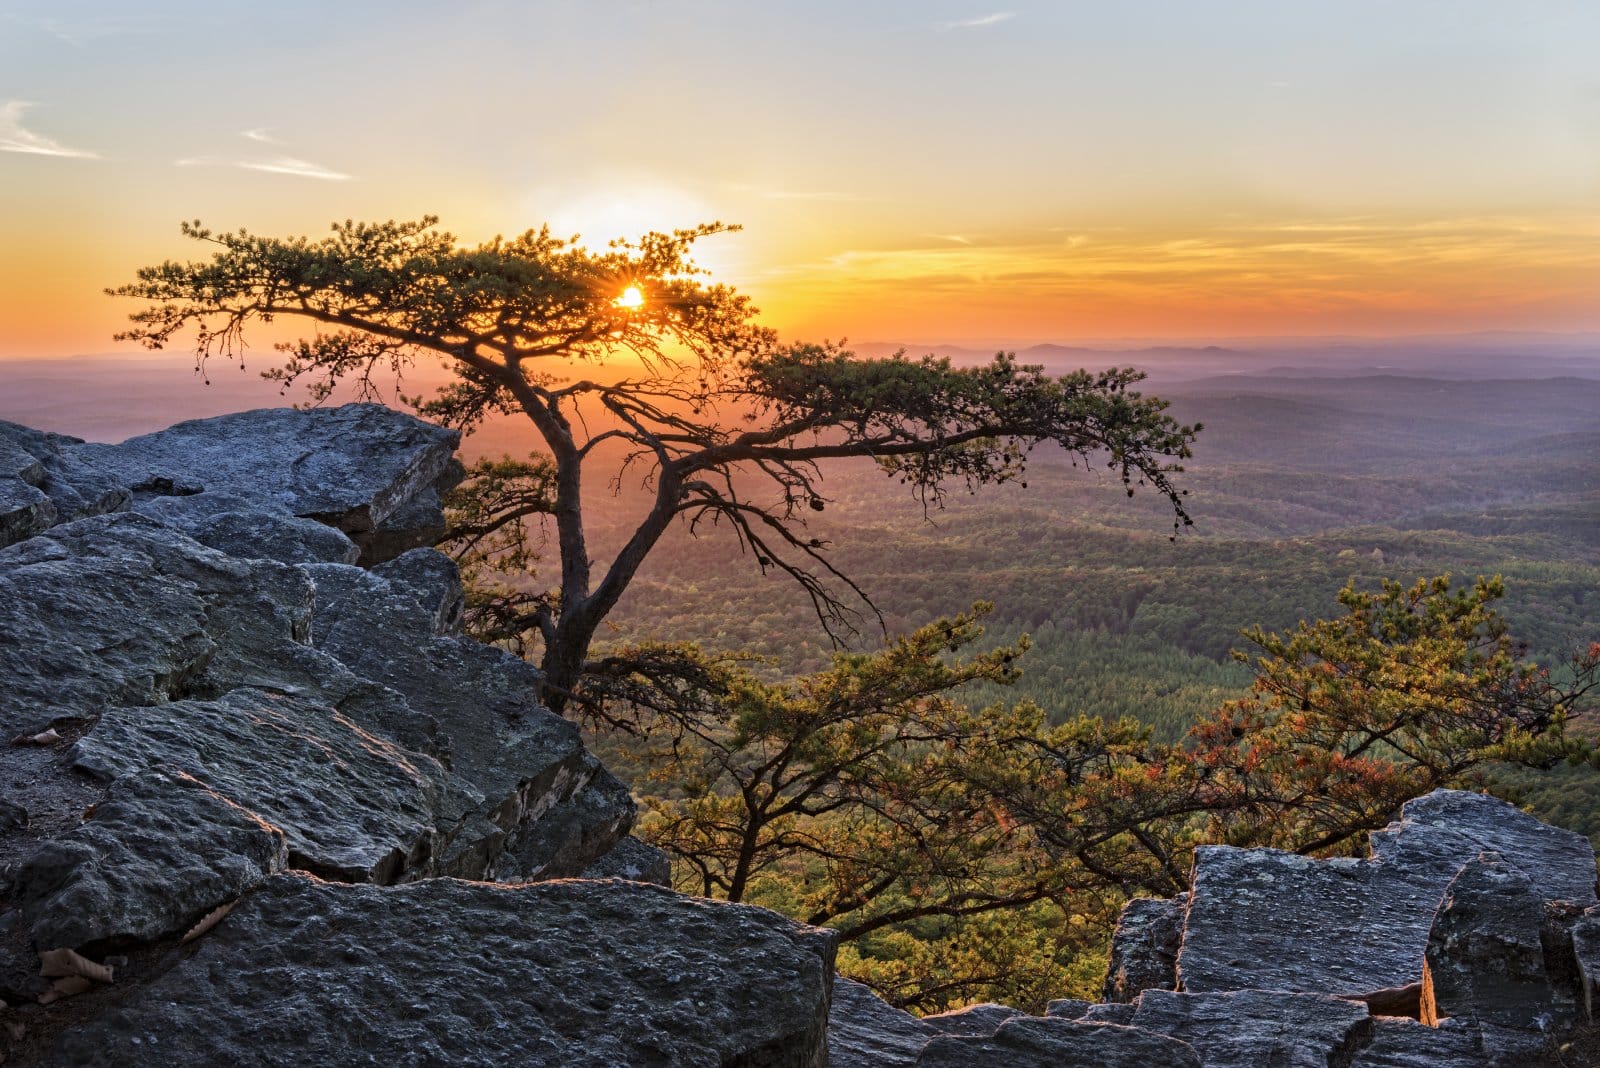 <p class="wp-caption-text">Image Credit: Shutterstock / Jim Vallee</p>  <p><span>Cheaha Mountain is the highest point in Alabama. You can see clear across the Talladega National Forest from up there. It’s like sittin’ on top of the world.</span></p>